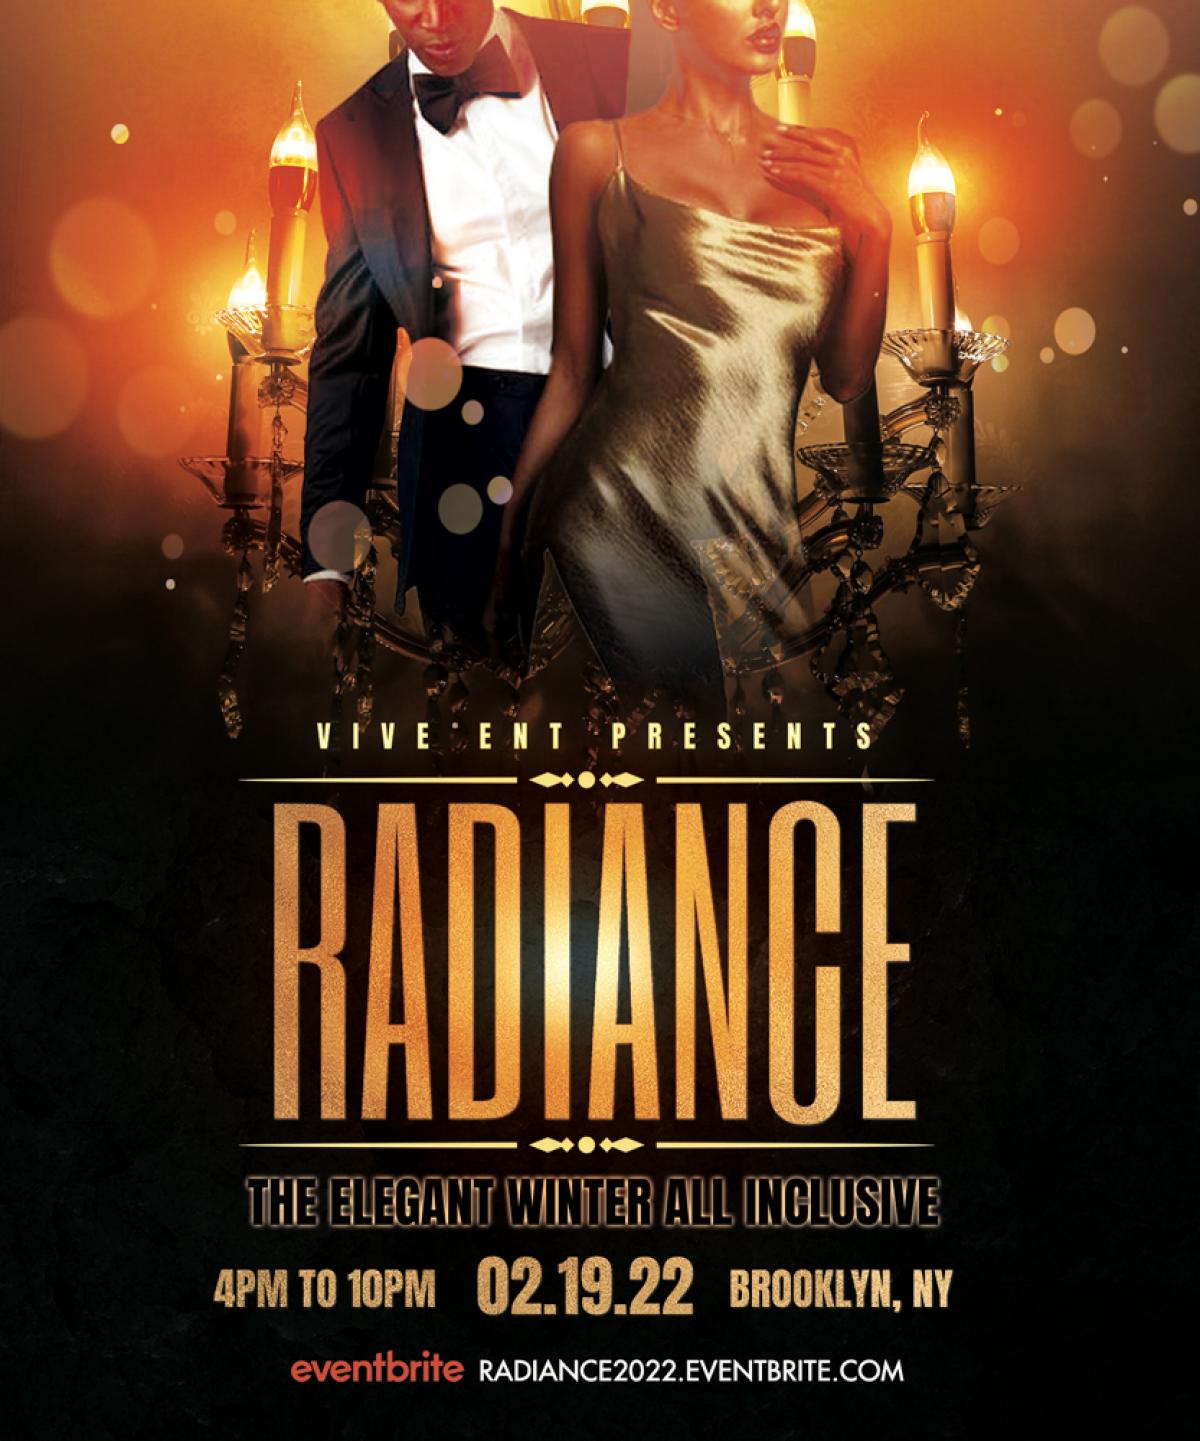 Radiance flyer or graphic.